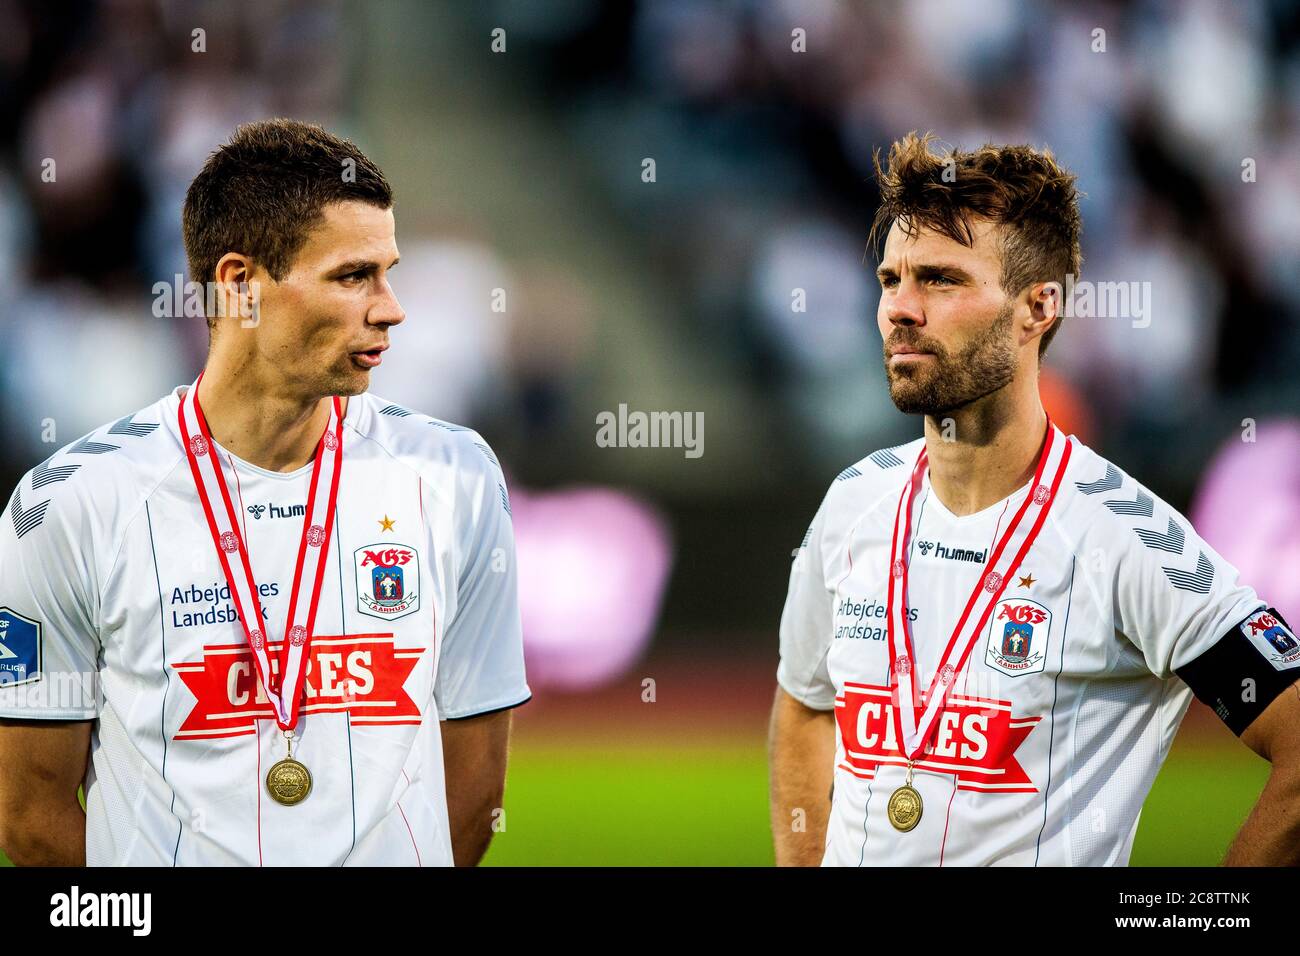 Aarhus, Denmark. 26th July, The players of AGF receive bronze medals the 3F Superliga match AGF and Brondby IF at Ceres Park in Aarhus. Here Nicklas Helenius (L) and